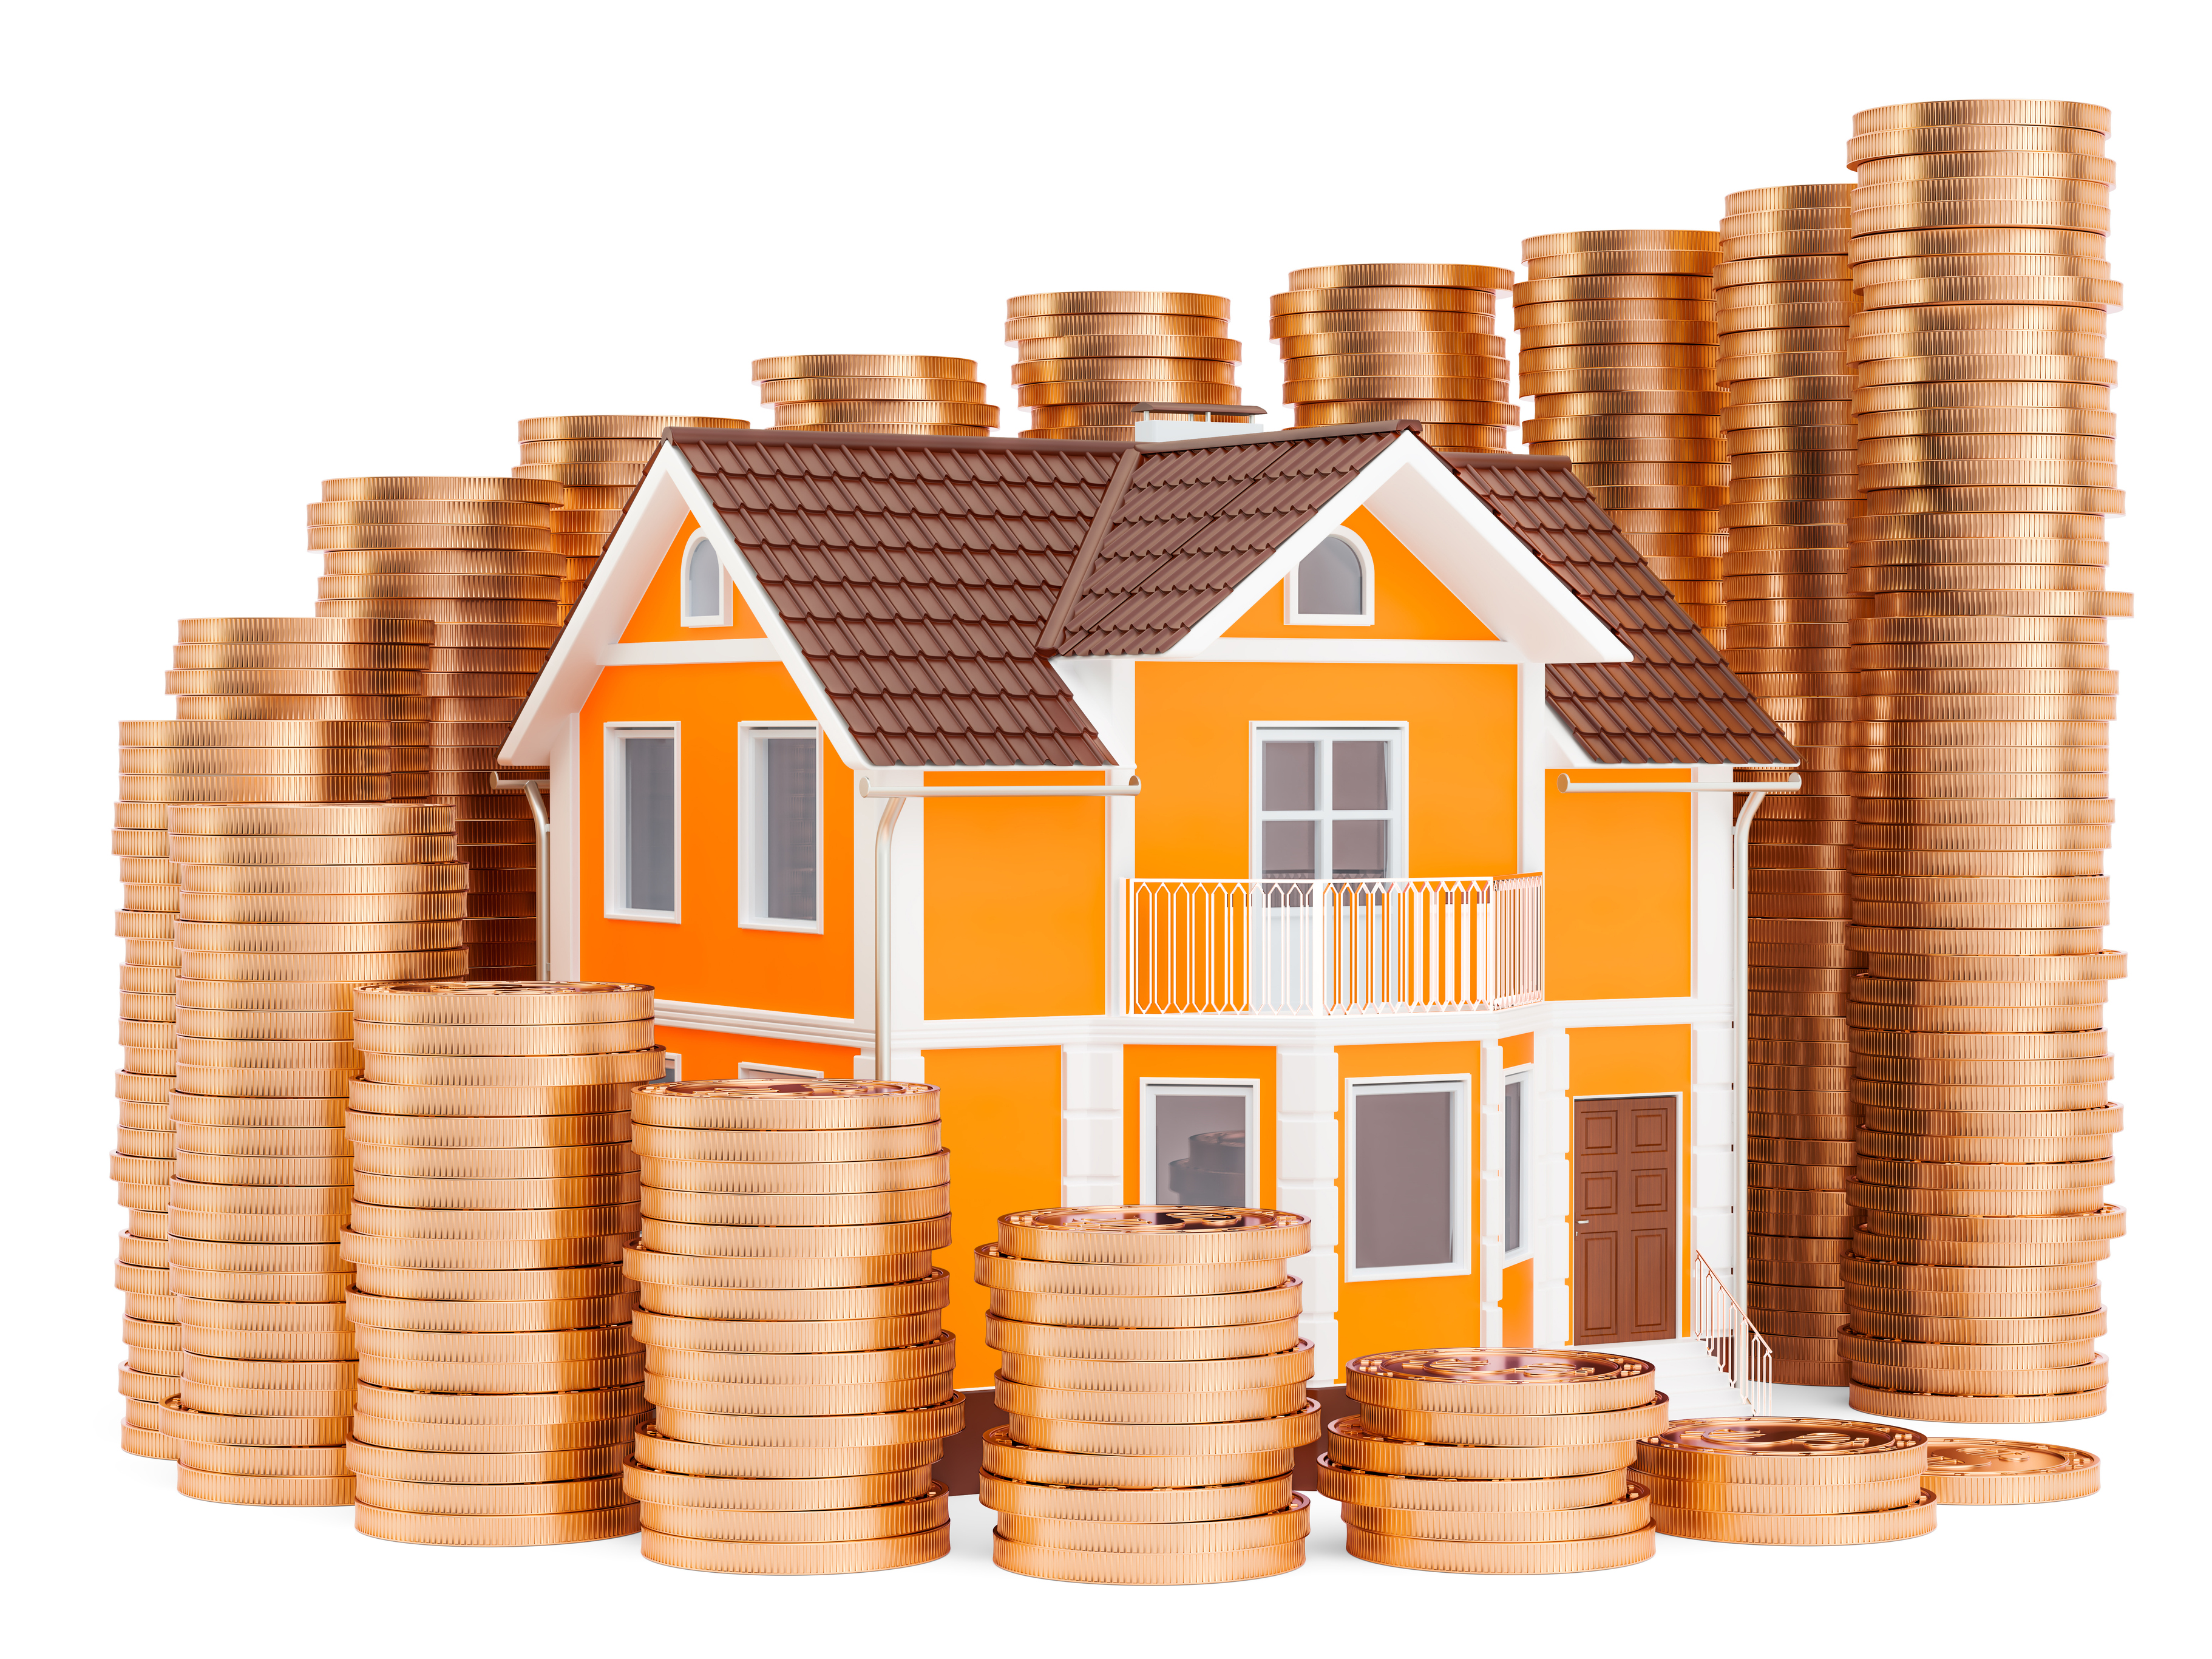 3 strategies for property investment: Which is best for you? - The